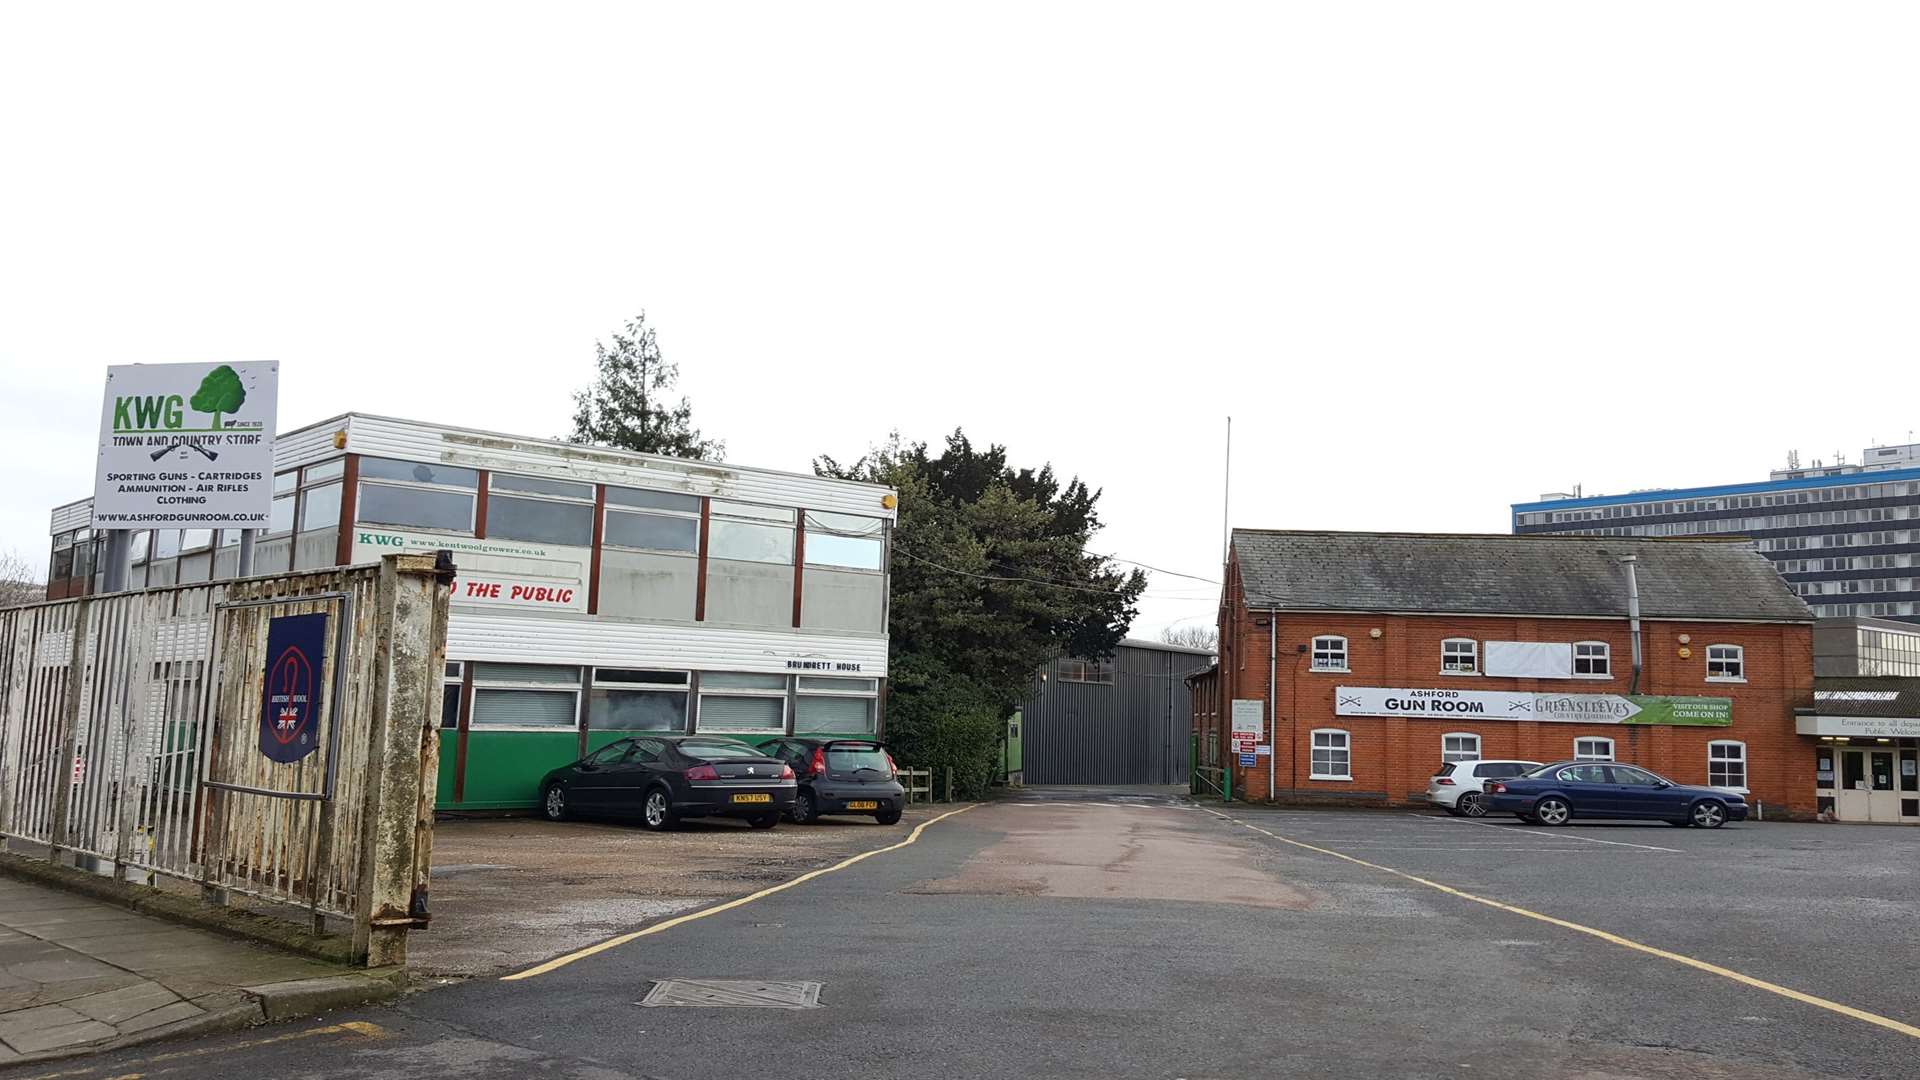 The former Kent Wool Growers site has been bought